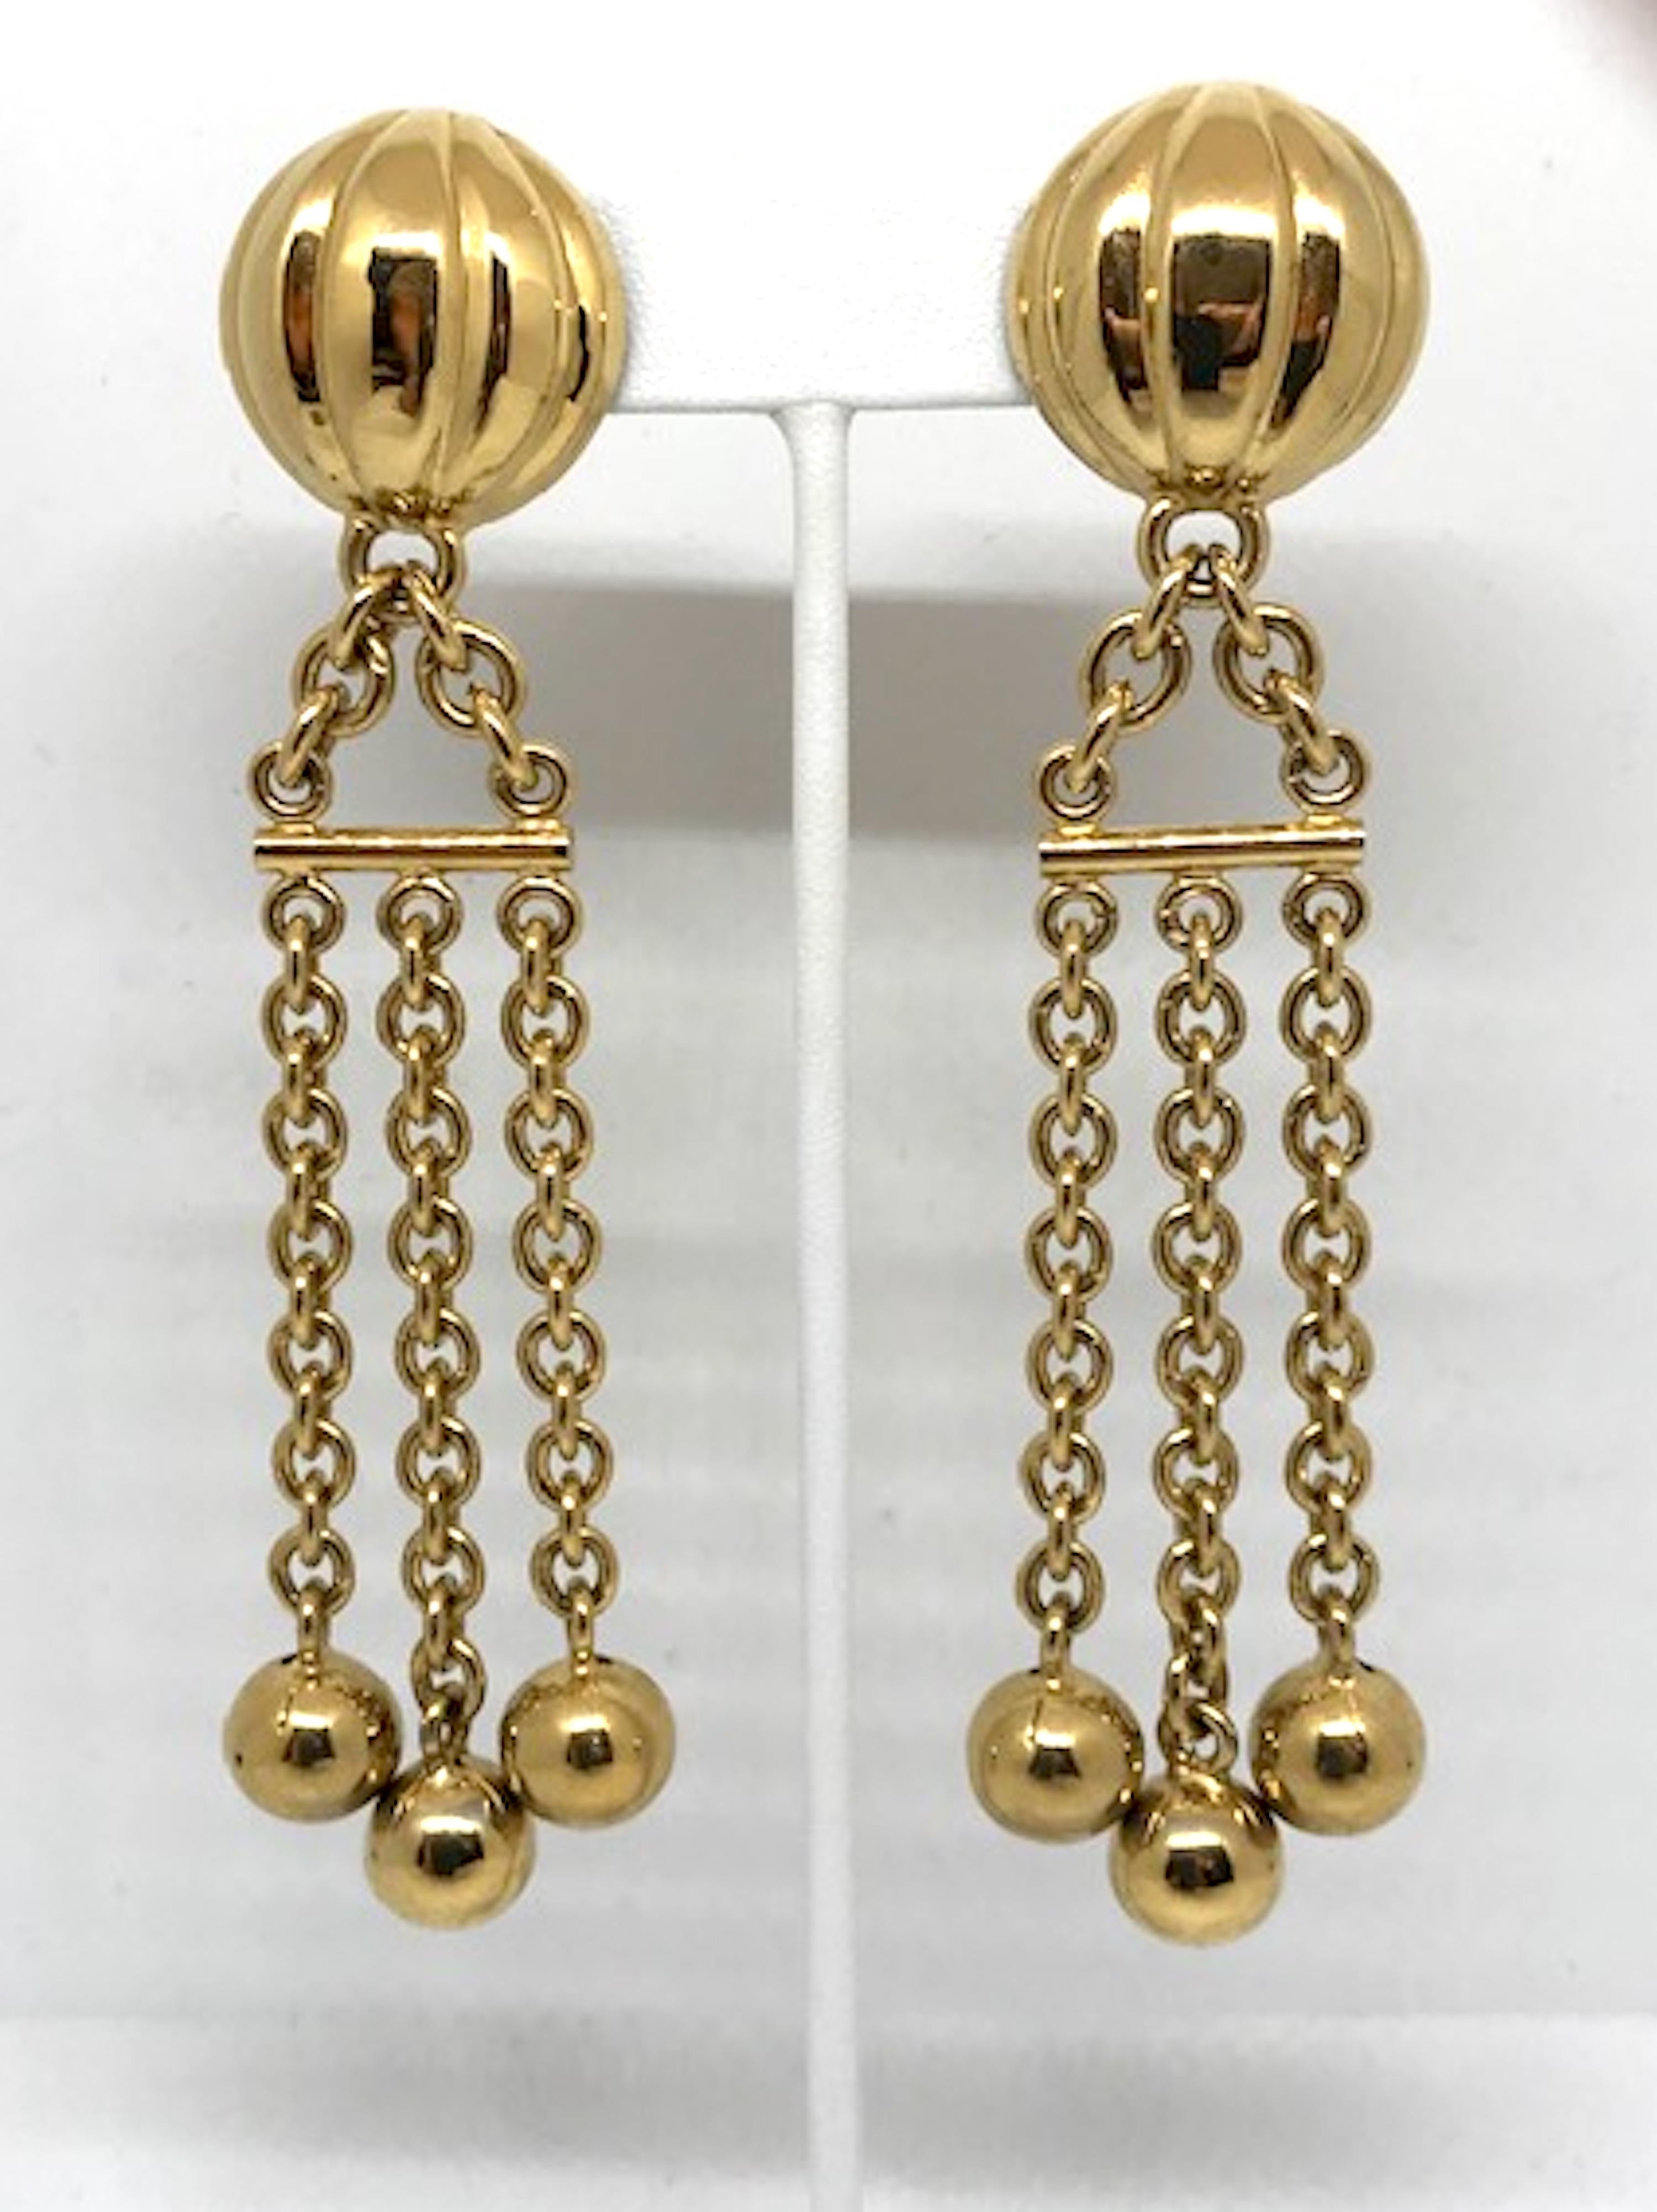 A lovely pair of 1980s gold plate chain with bead fringe earrings from Italian fashion company Bijoux Cascio. Bijoux Cascio jewelry company began in 1948 by Gaetano Cascio in Firenze Italy. This prestigious costume jewelry house created lines of